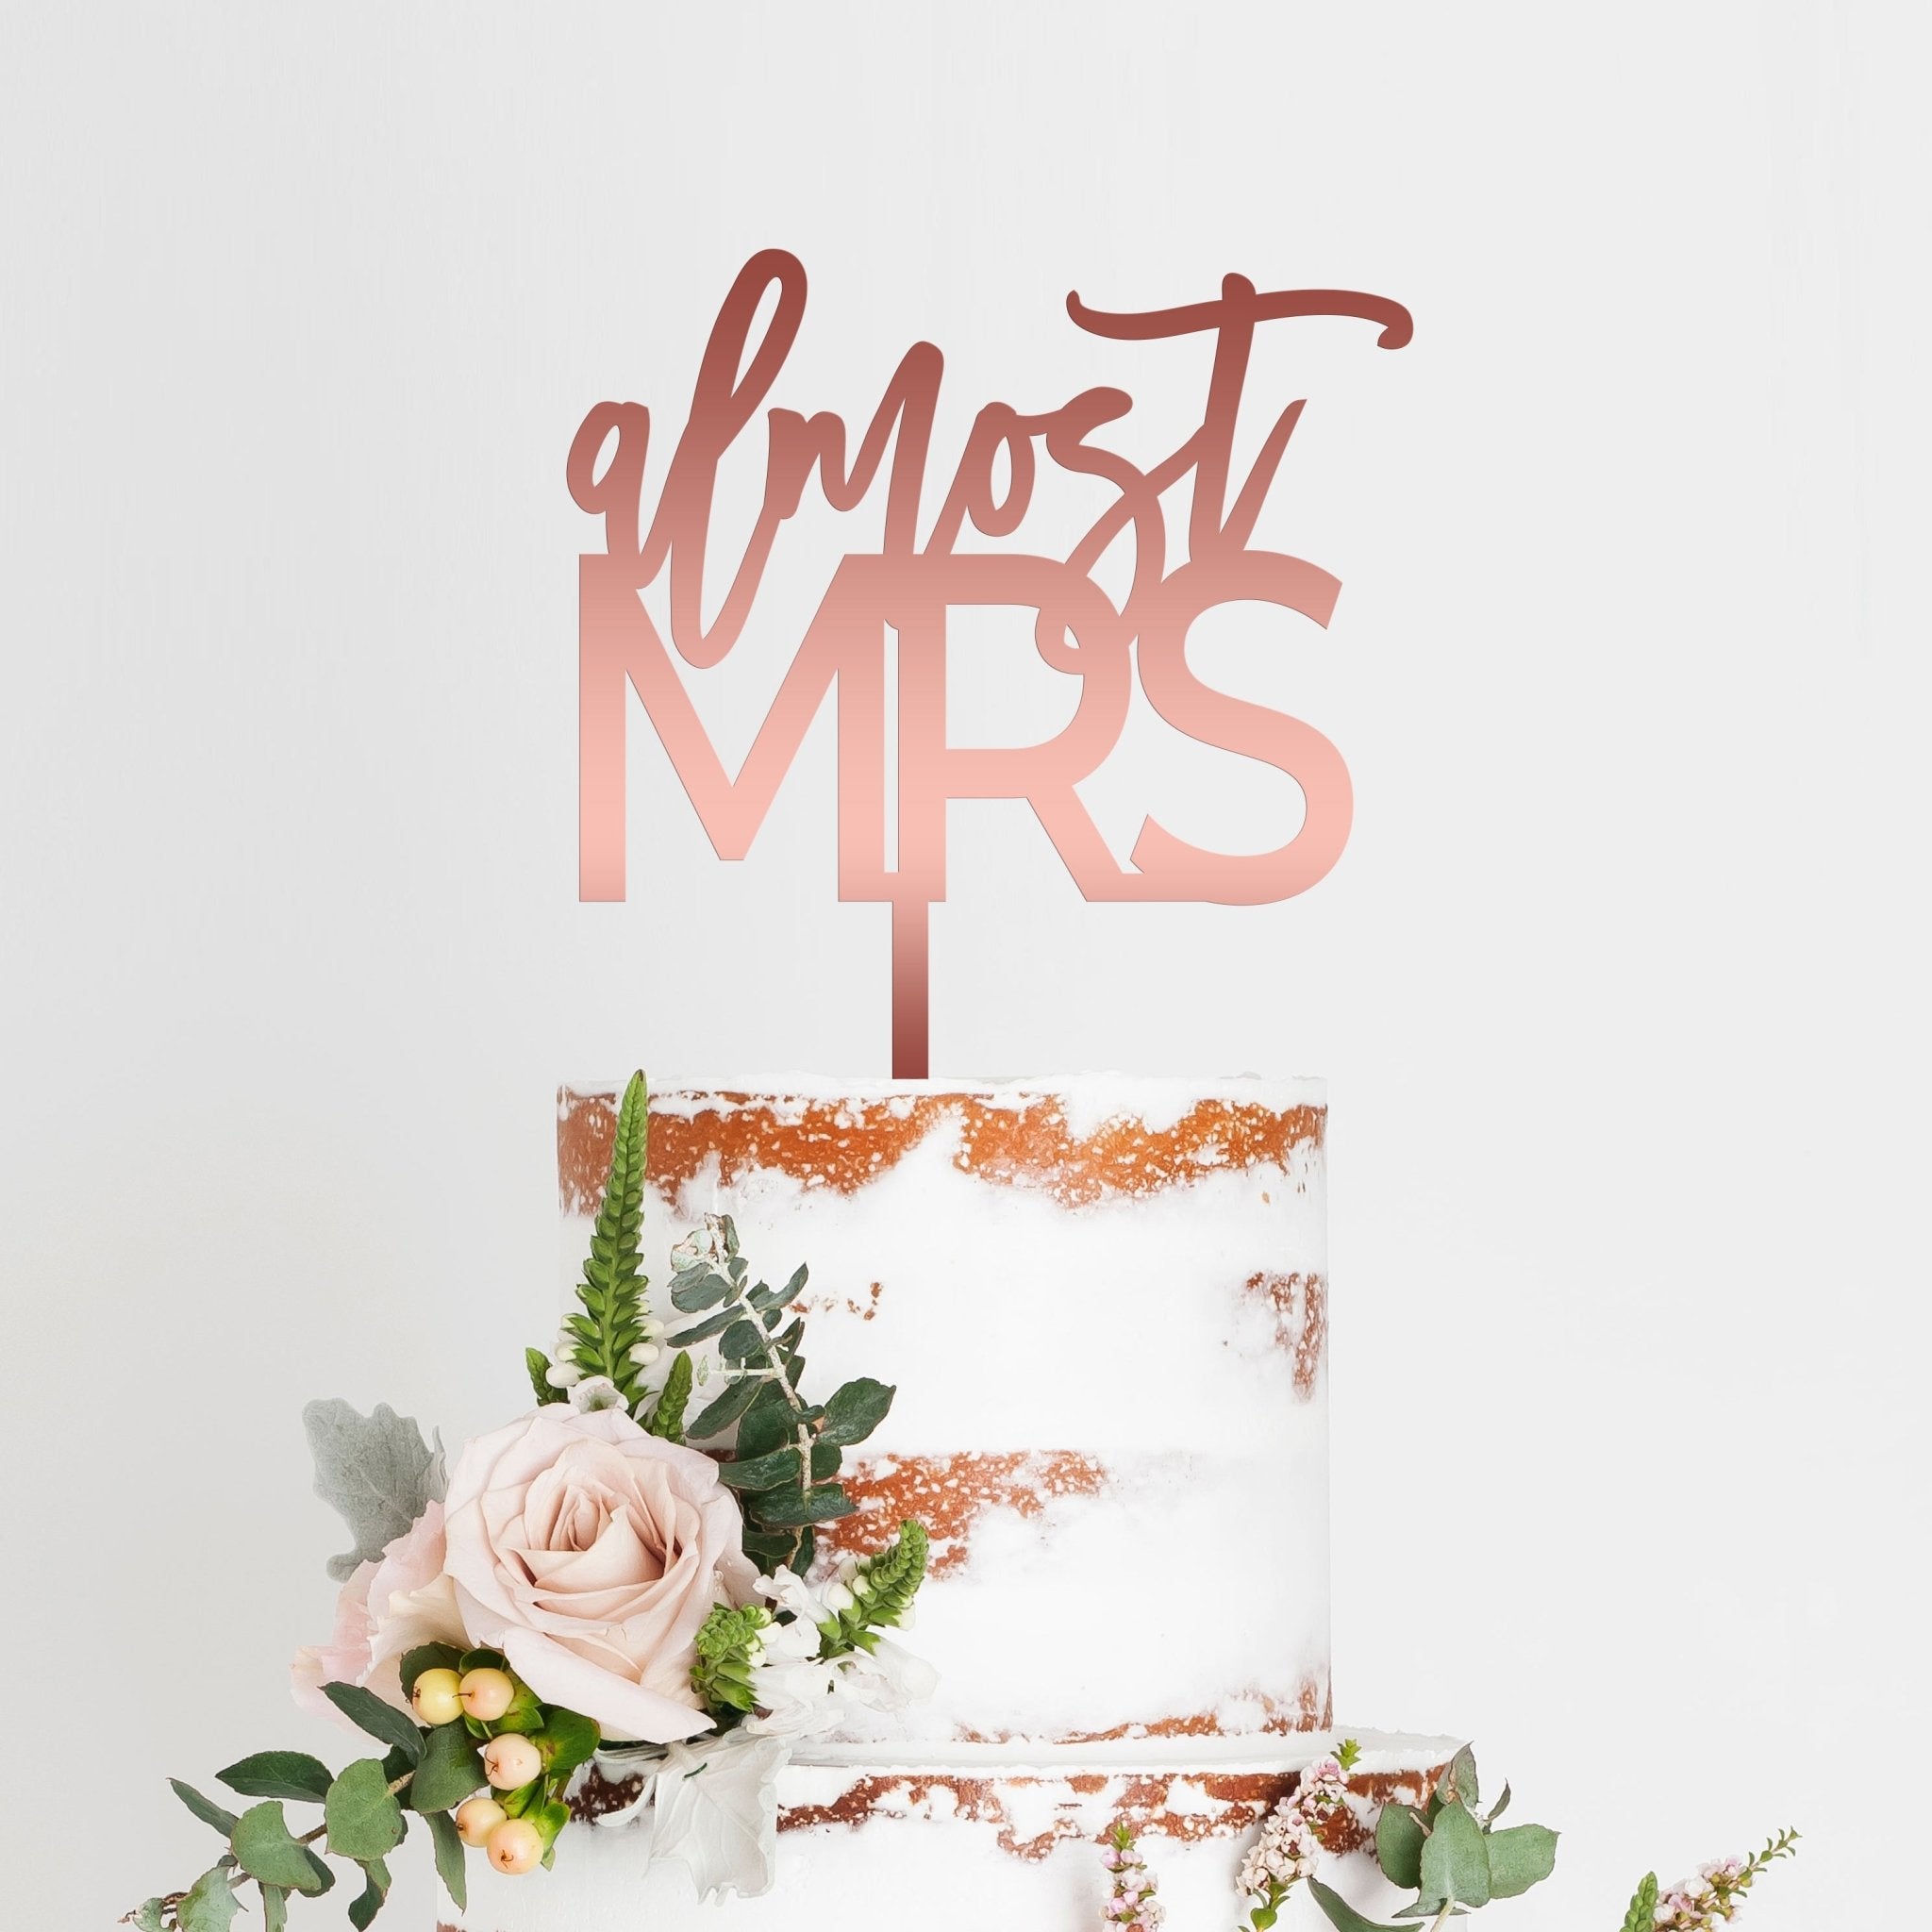 Bride to be Cake Topper Rose Gold for Engagement Party, Bridal Shower  Wedding, Bachelorette Party Cake Decor Supplies, Bridal Shower Cake Picks  with Ring Wedding Dress (1pcs) price in Saudi Arabia |